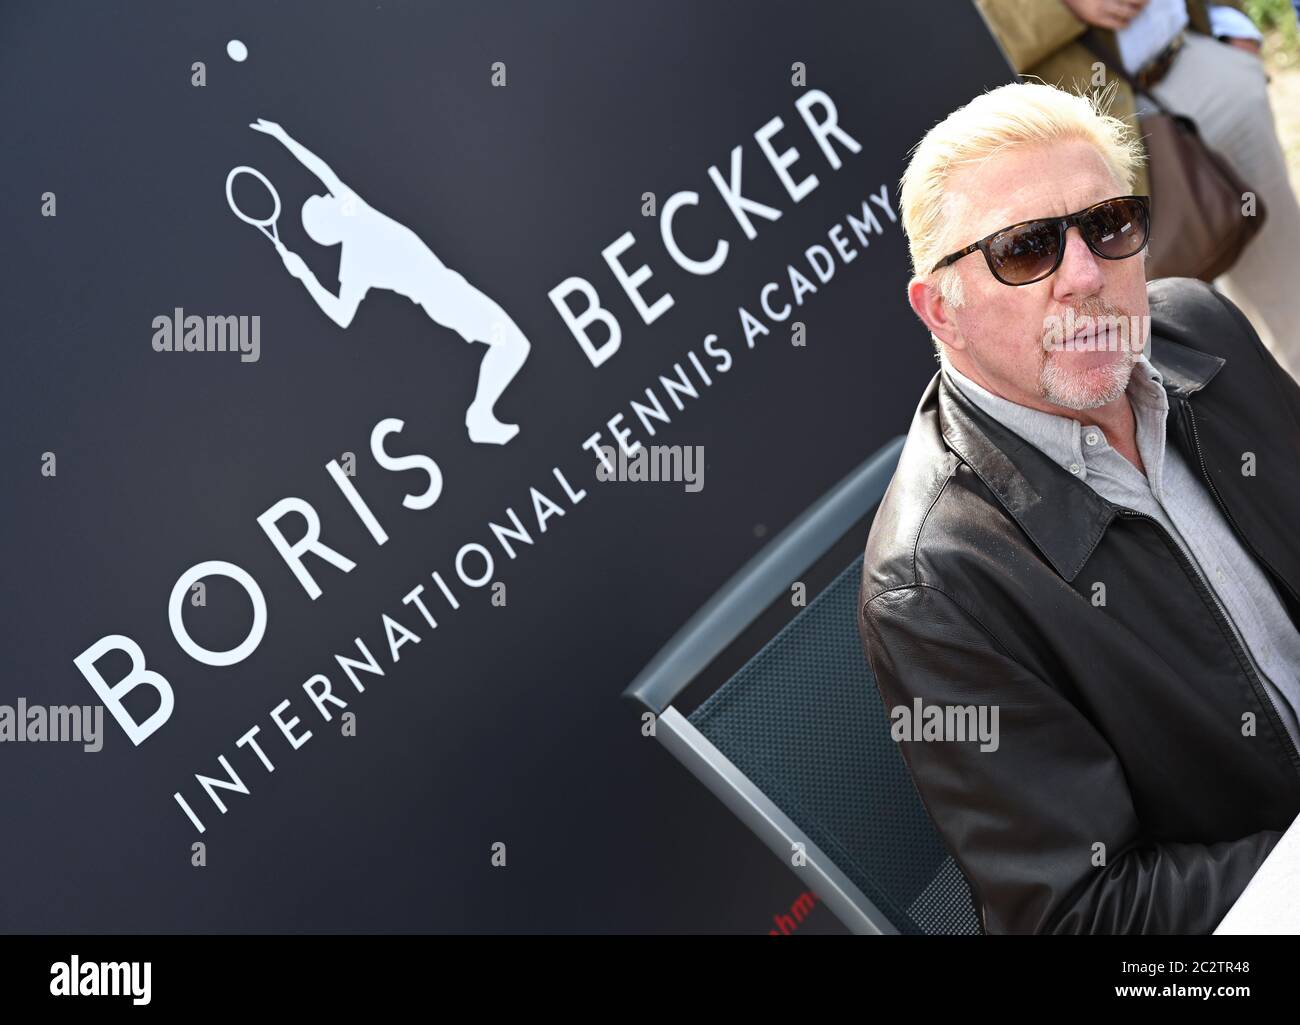 Hochheim, Germany. 18th June, 2020. Tennis legend Boris Becker takes part  in the ground-breaking ceremony for the planned International Tennis  Academy, of which Becker is the name-giver. The 20 million euro project